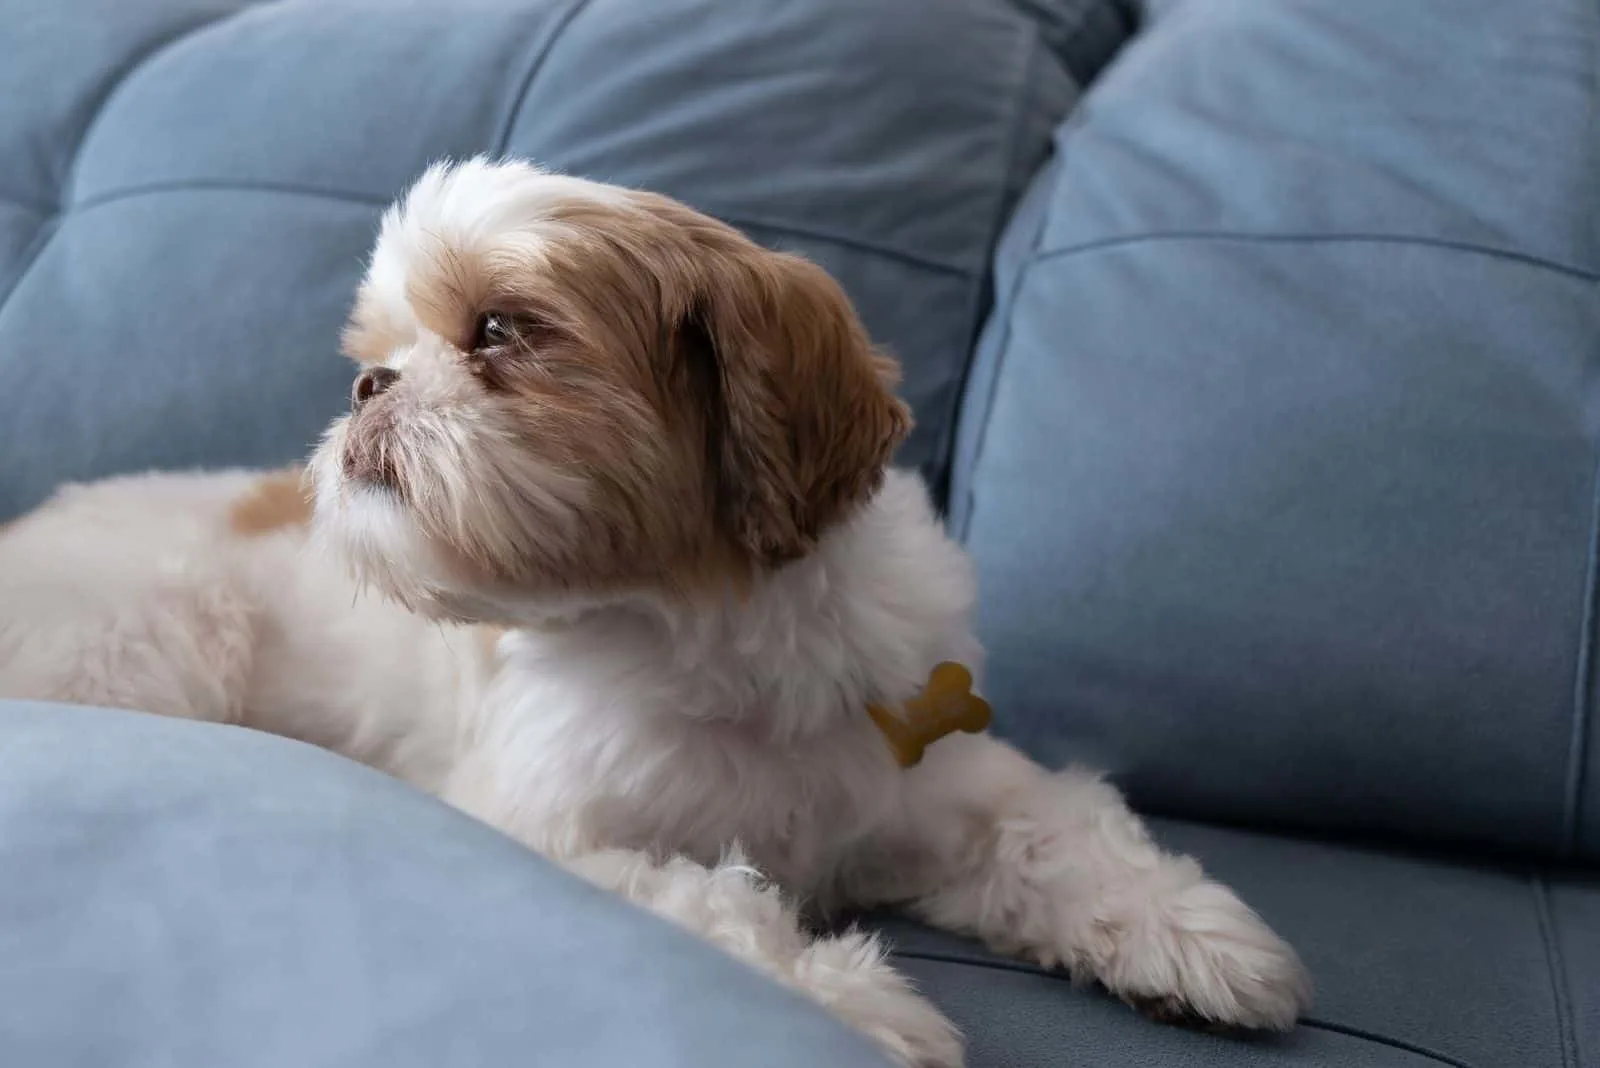 shih tzu dog lying and resting on the sofa looking to the side.